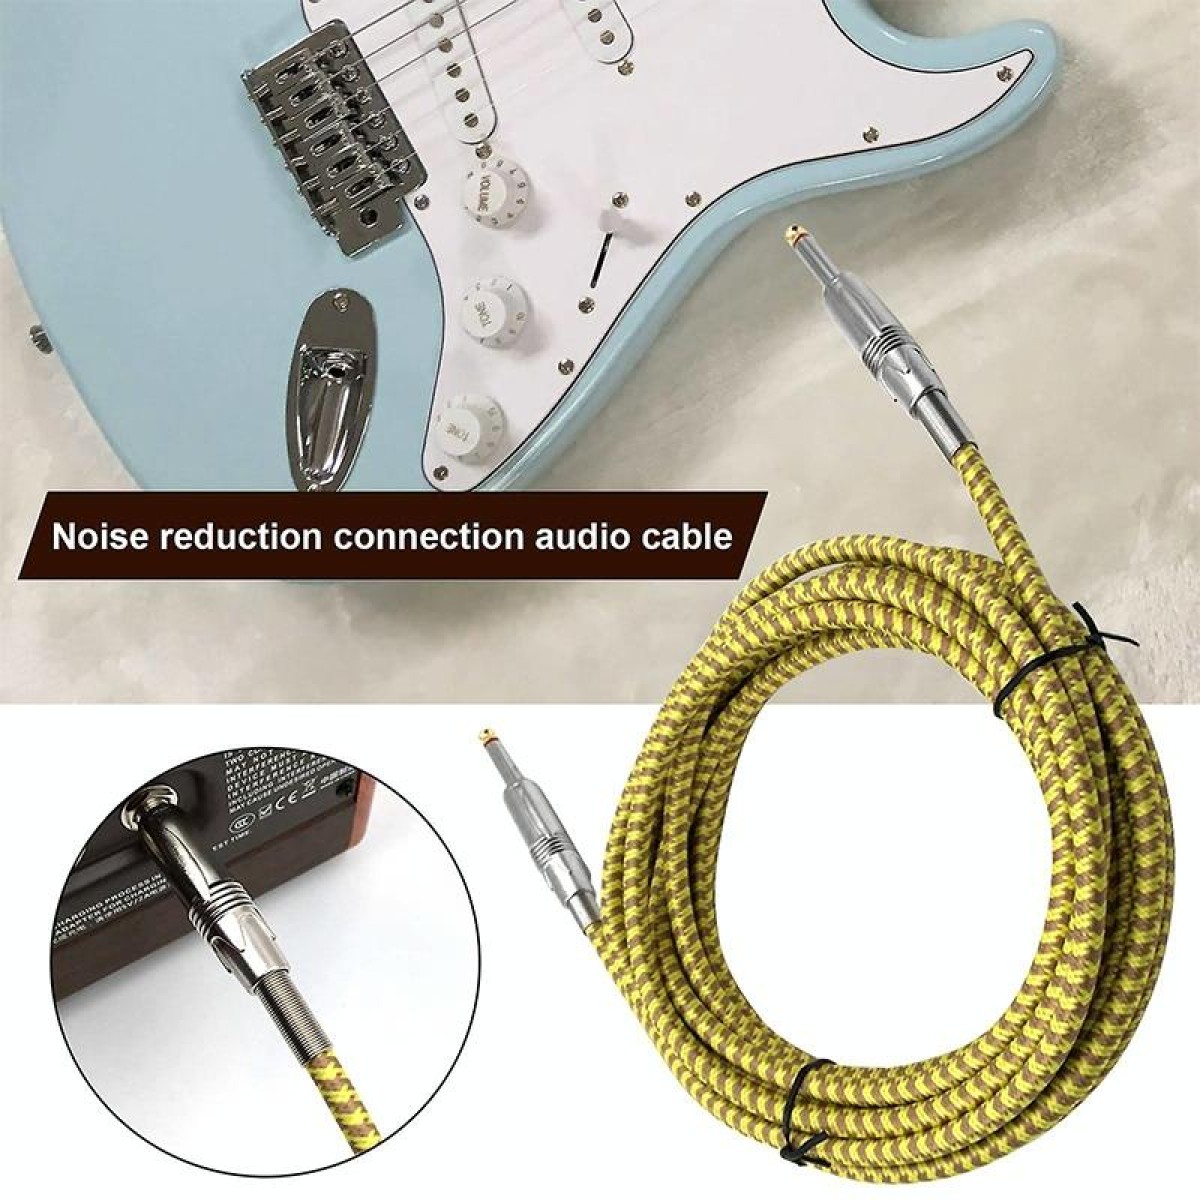 Wooden Guitar Bass Connection Cable Noise Reduction Braid Audio Cable, Cable Length: 5m